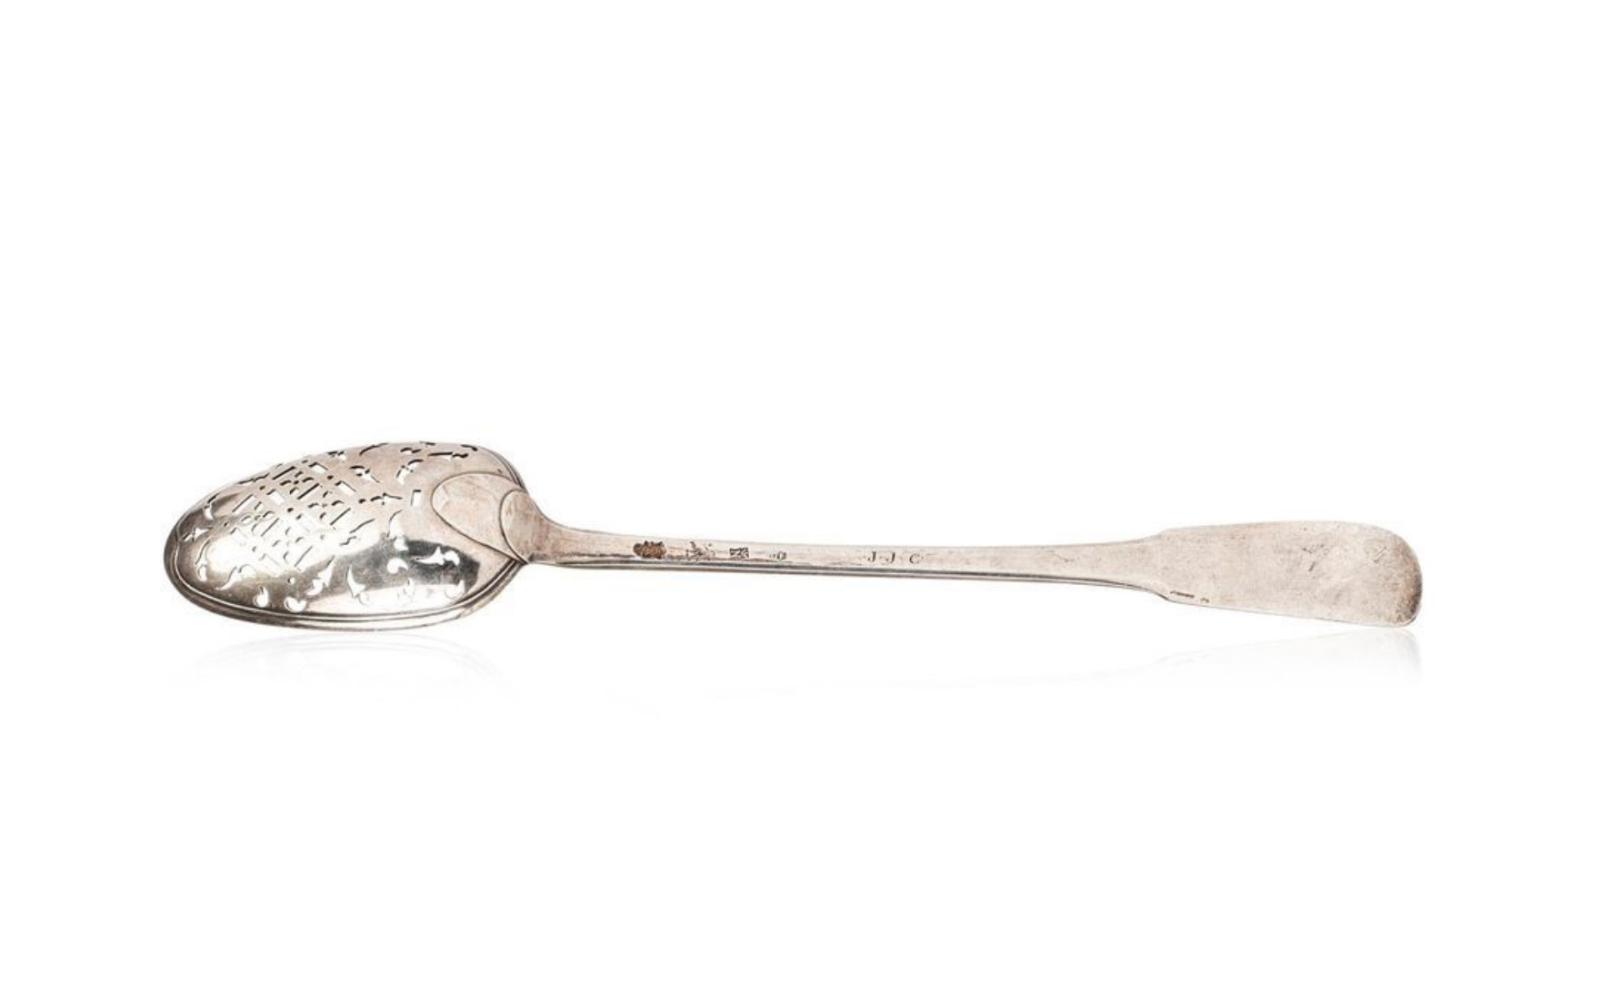 €1,365 Le Mans, 1735. Silver olive spoon, single flat model, the bowl with openwork tears and diamond-shaped motifs, weight 15 g/0.53 oz.P